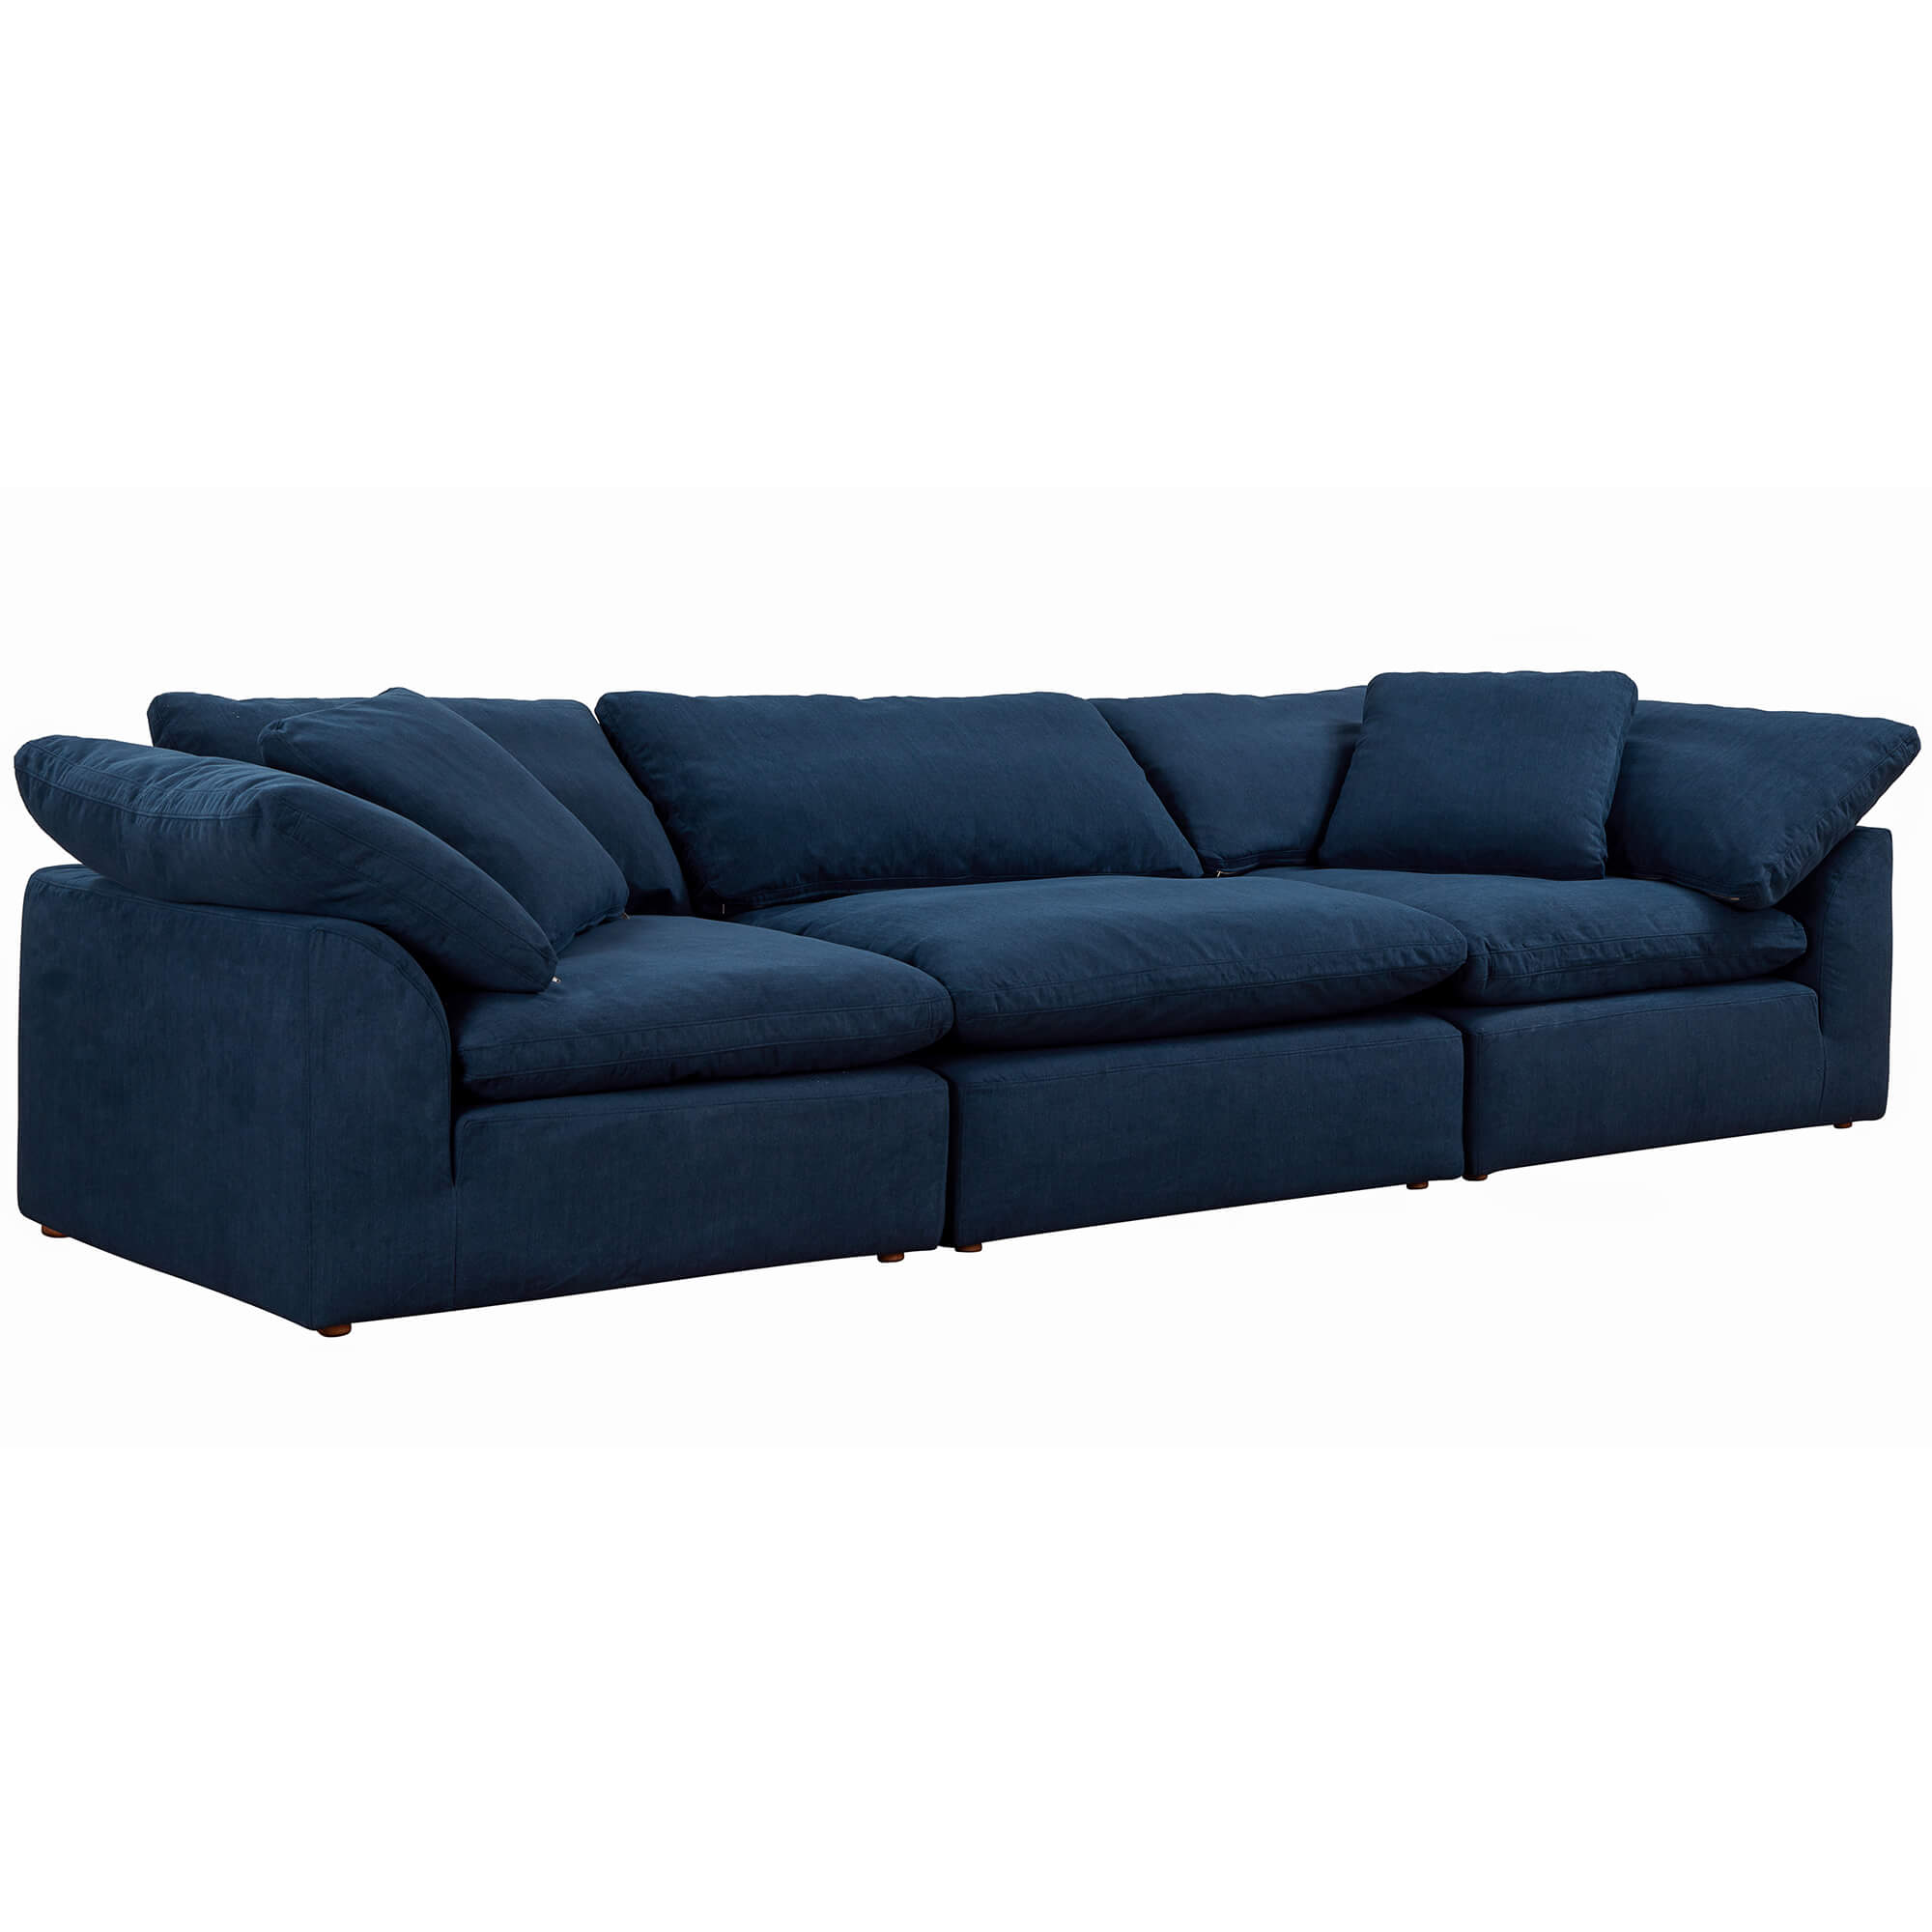 Cloud Puff Slipcovered Modular Sectional Sofa Color